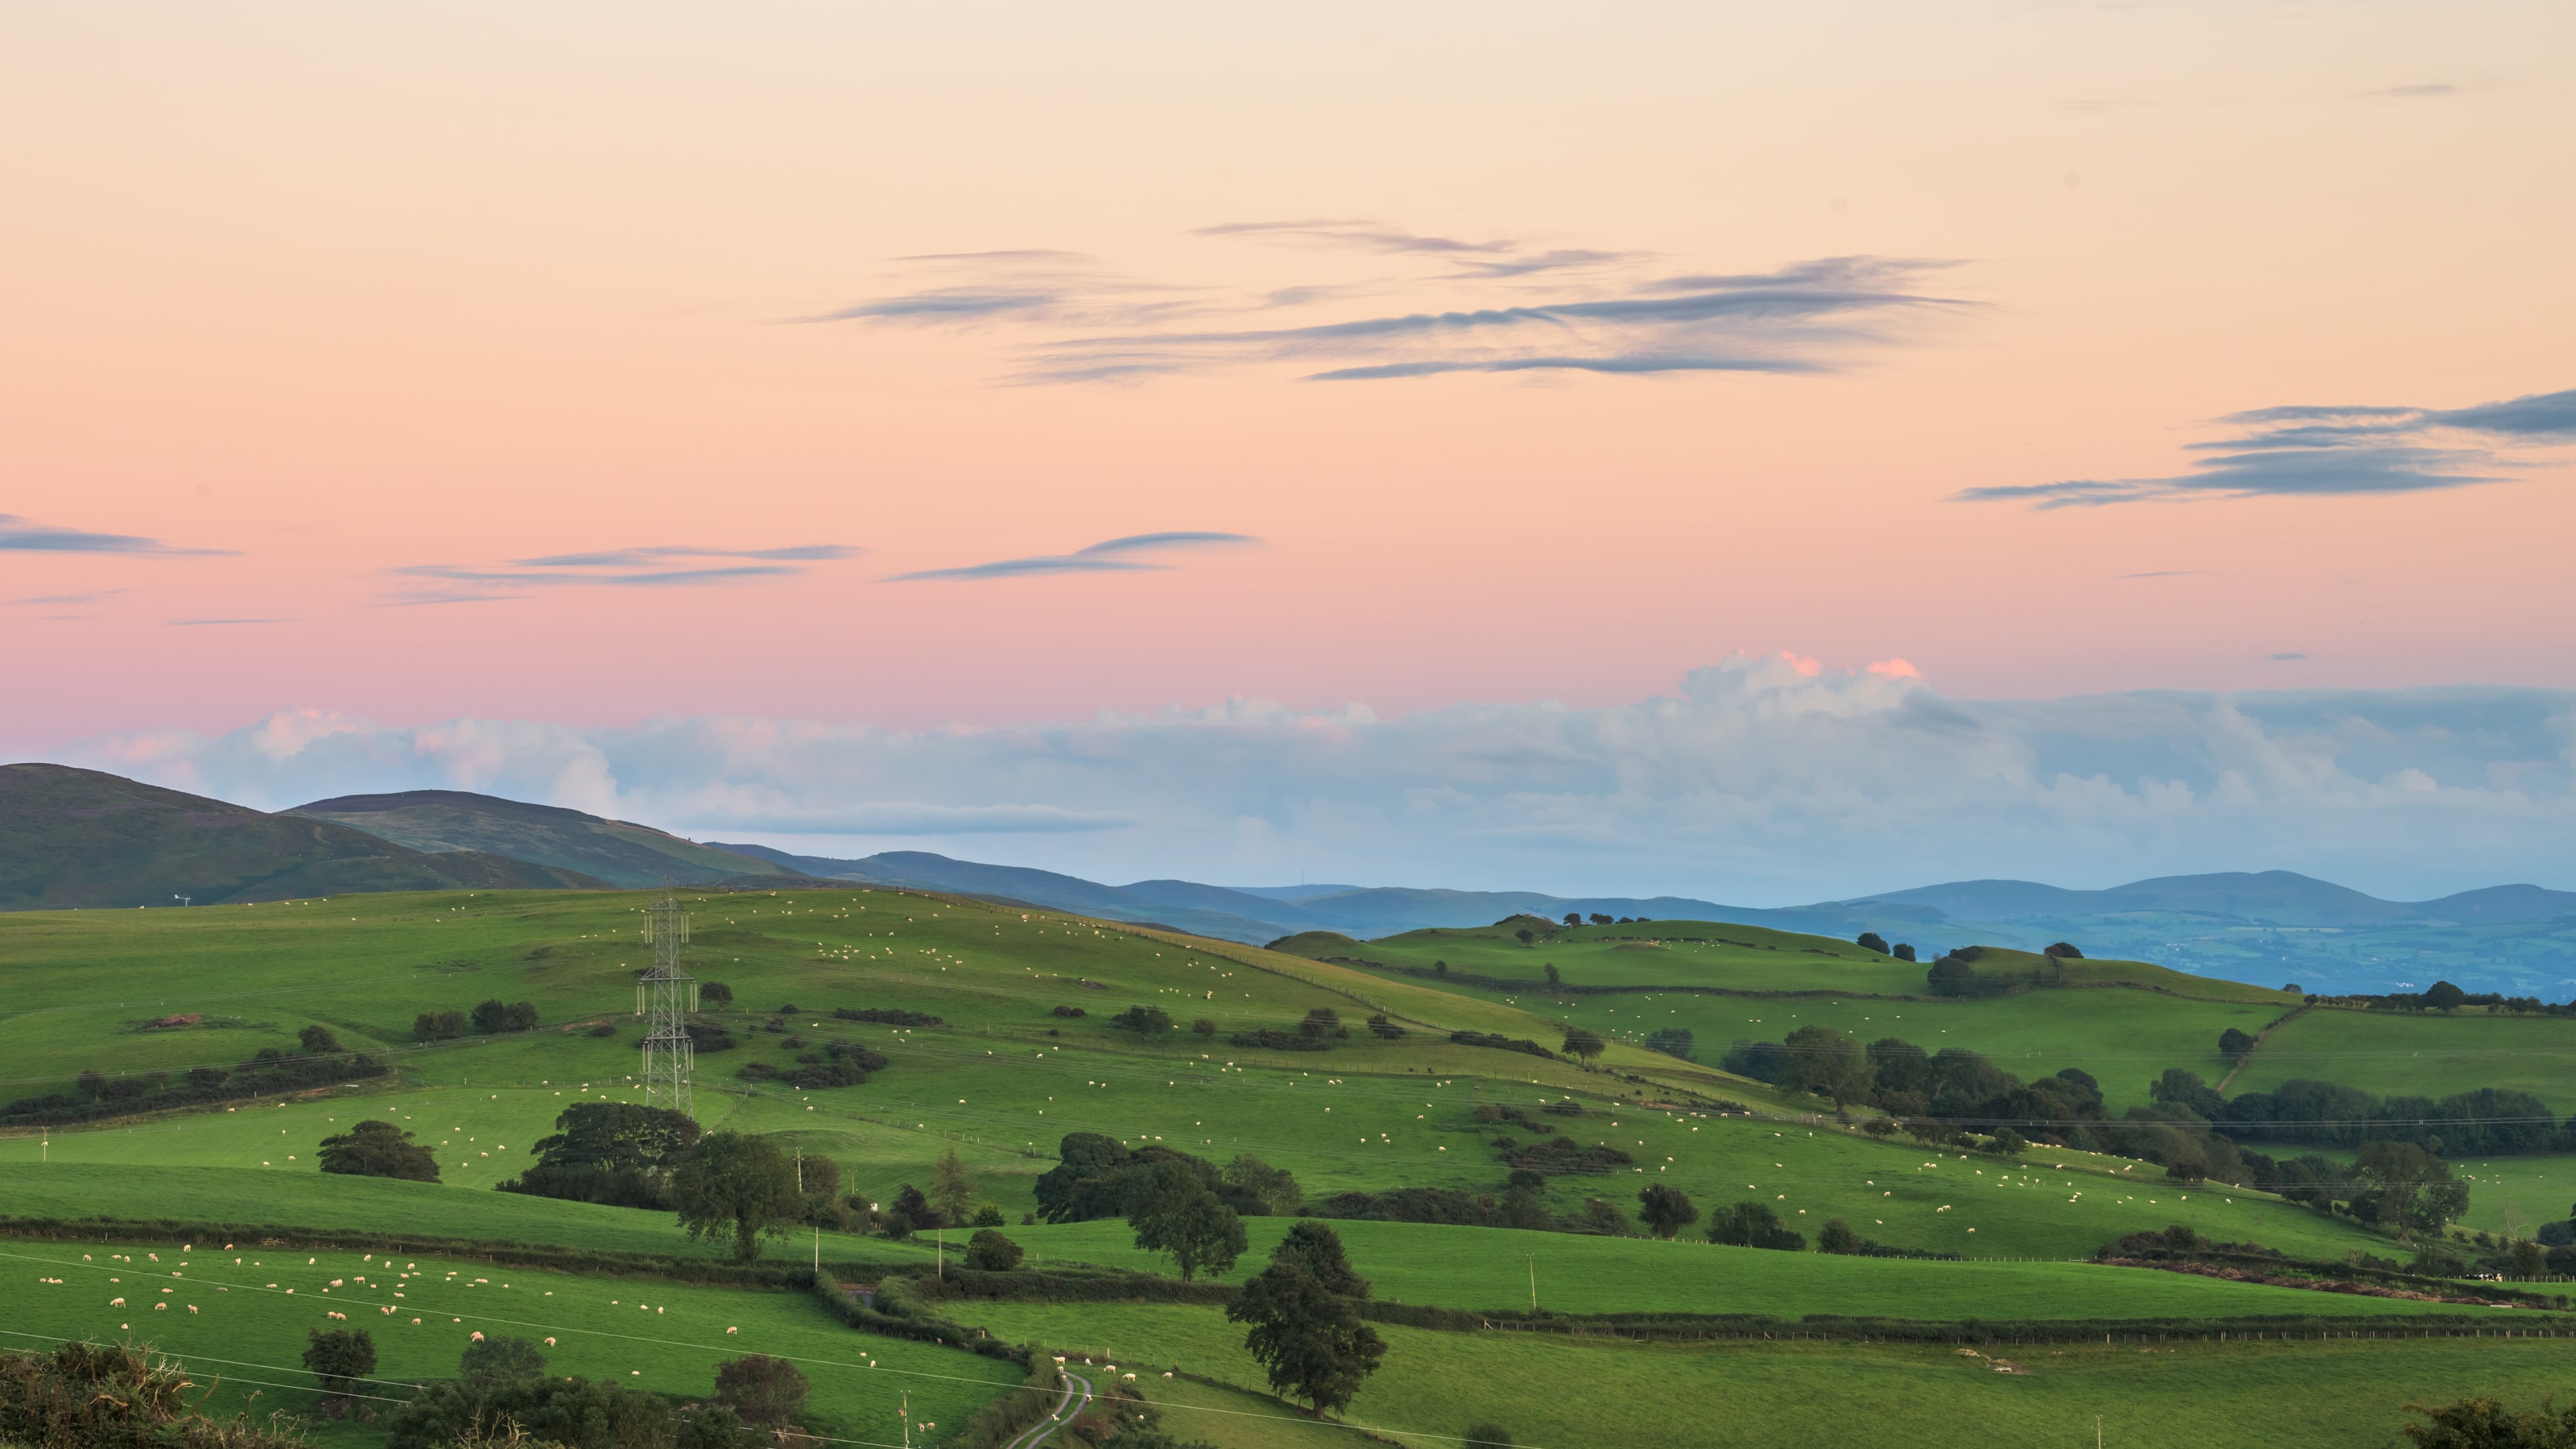 Images showing the landscape of the Clwydian Range and Dee Valley National Landscape